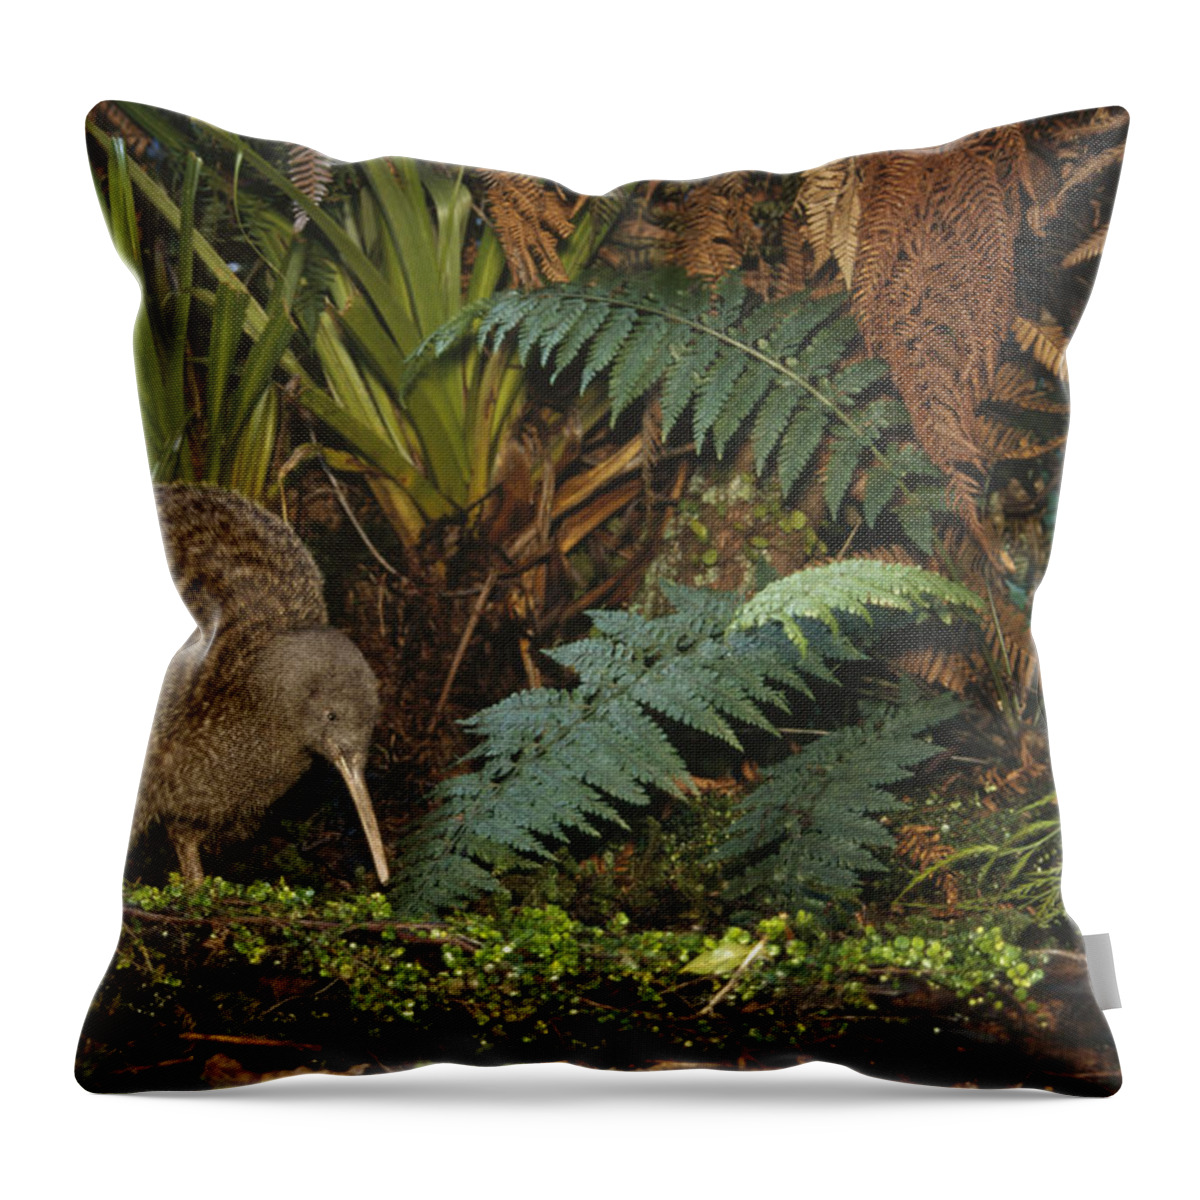 Feb0514 Throw Pillow featuring the photograph Great Spotted Kiwi Male In Rainforest by Tui De Roy